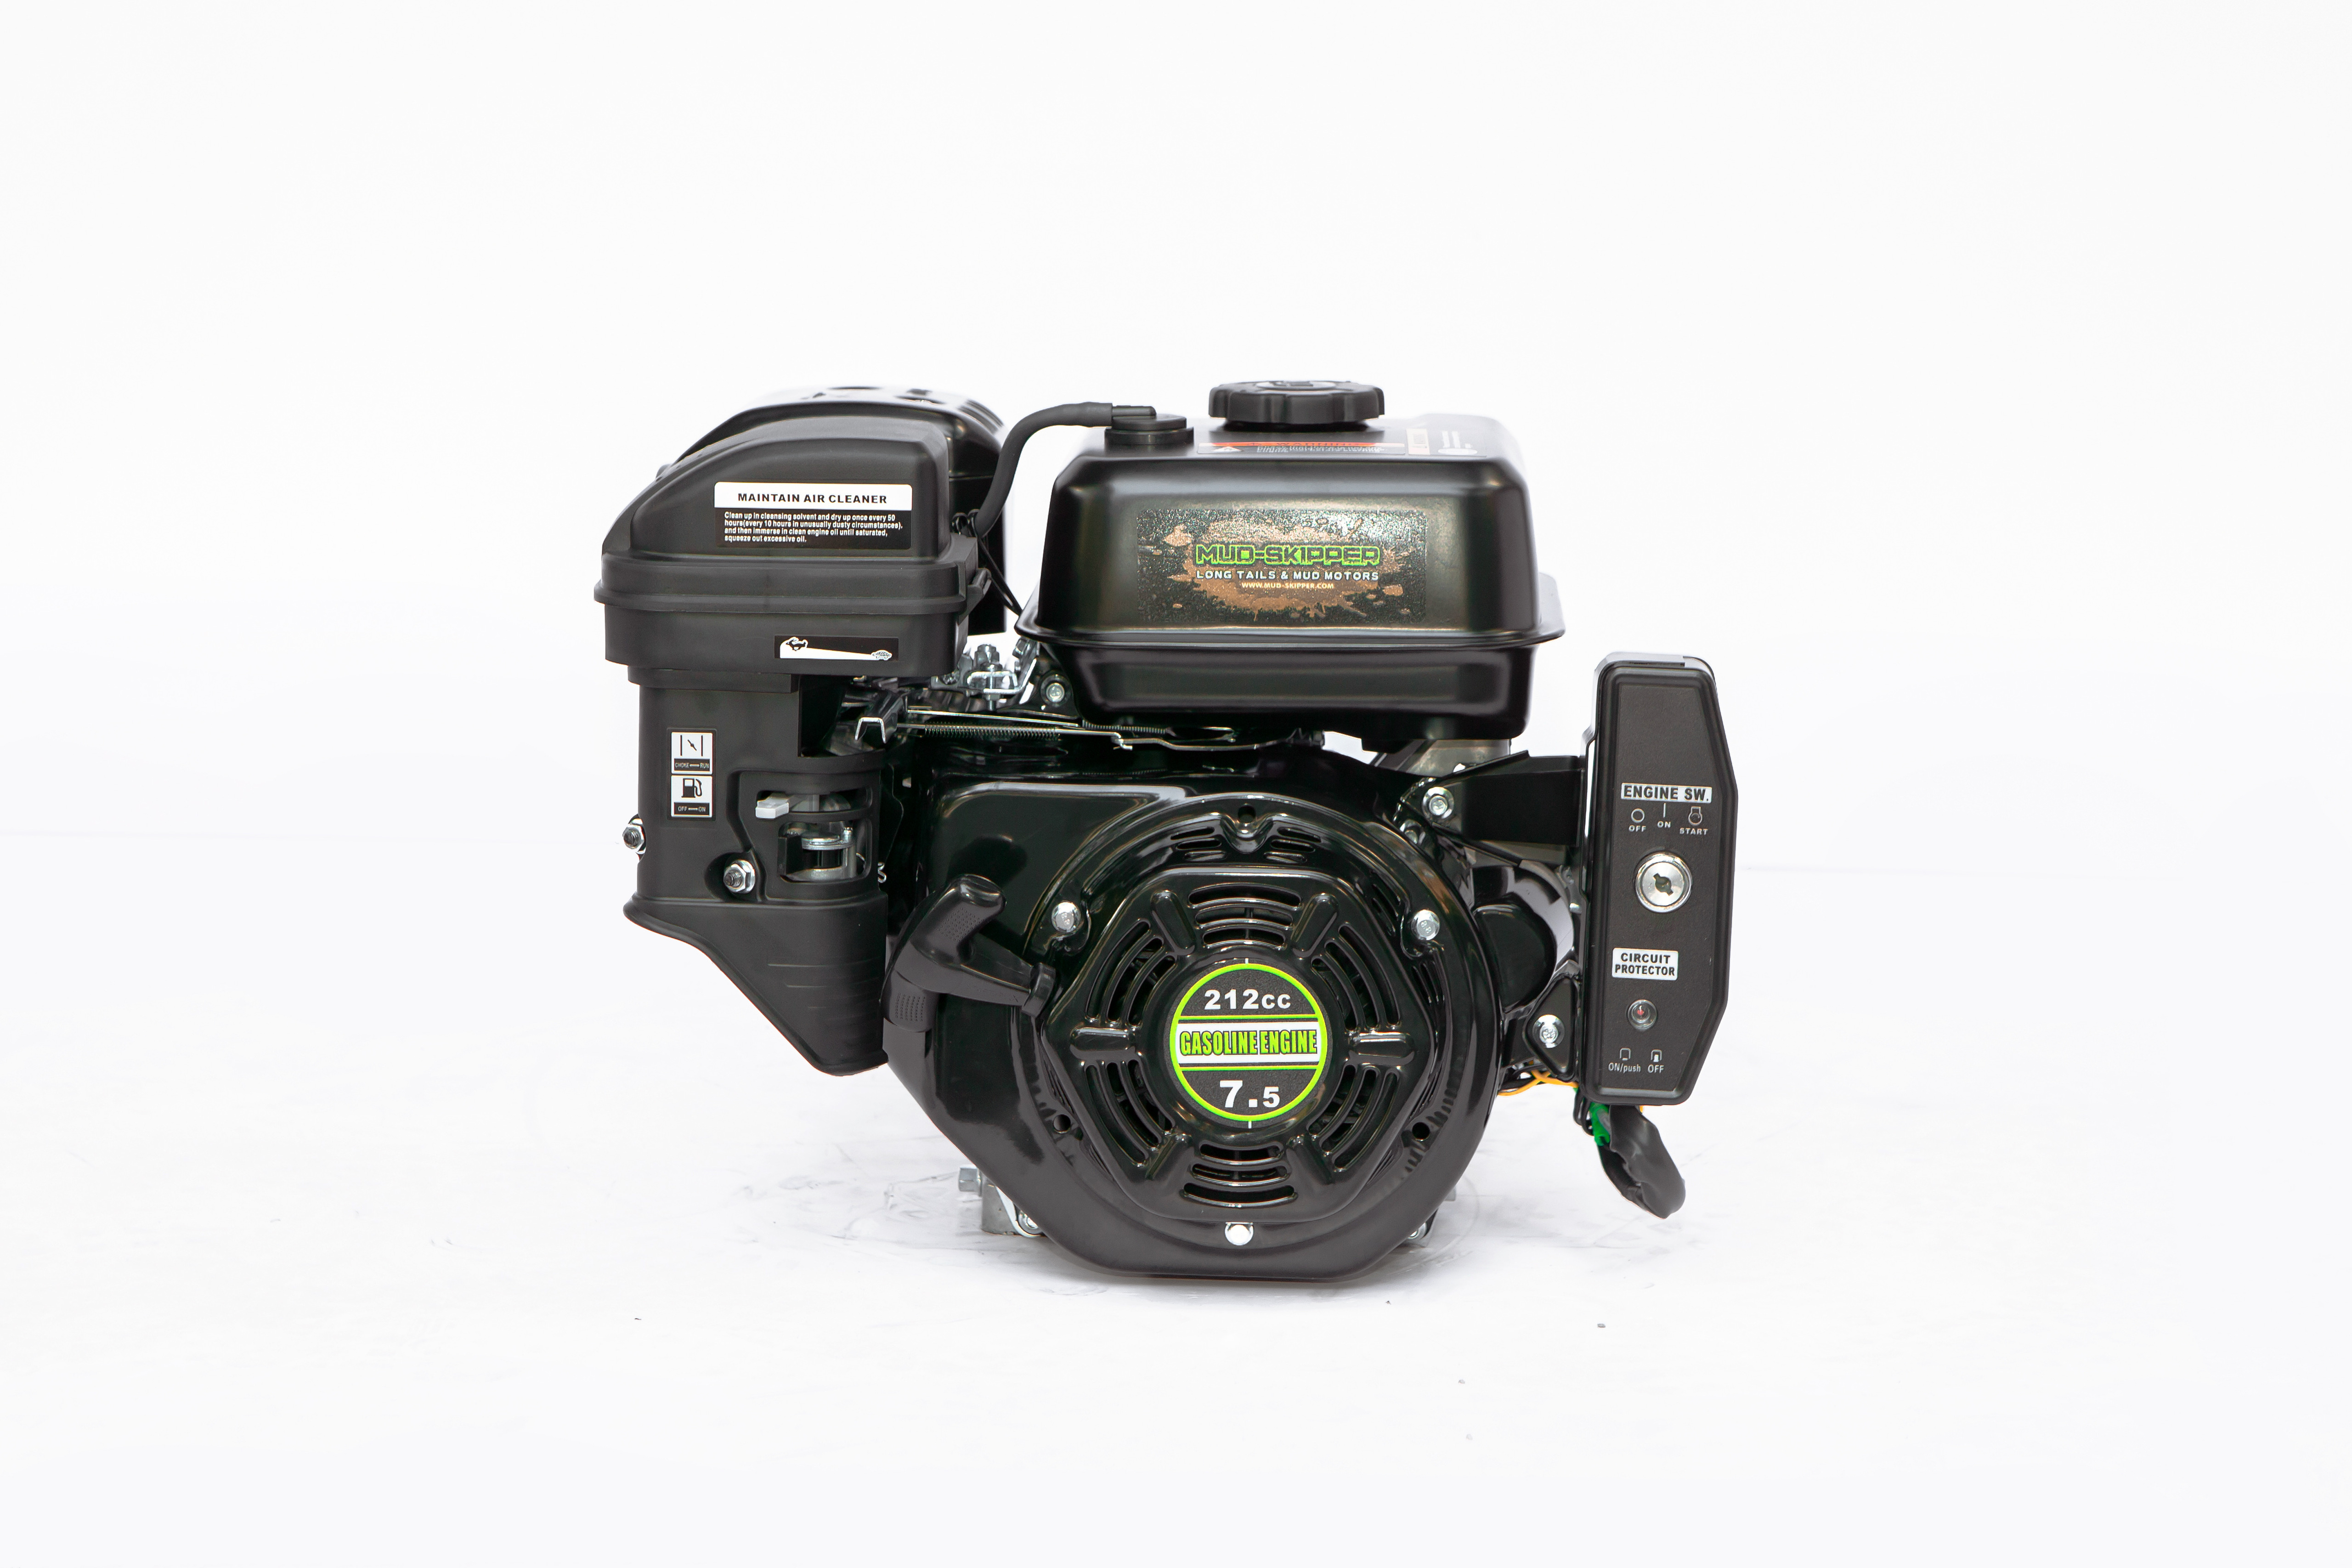 7.5HP 4-STROKE GASOLINE ENGINE - ELECTRIC START - 3/4" PTO - Weighs 38lbs